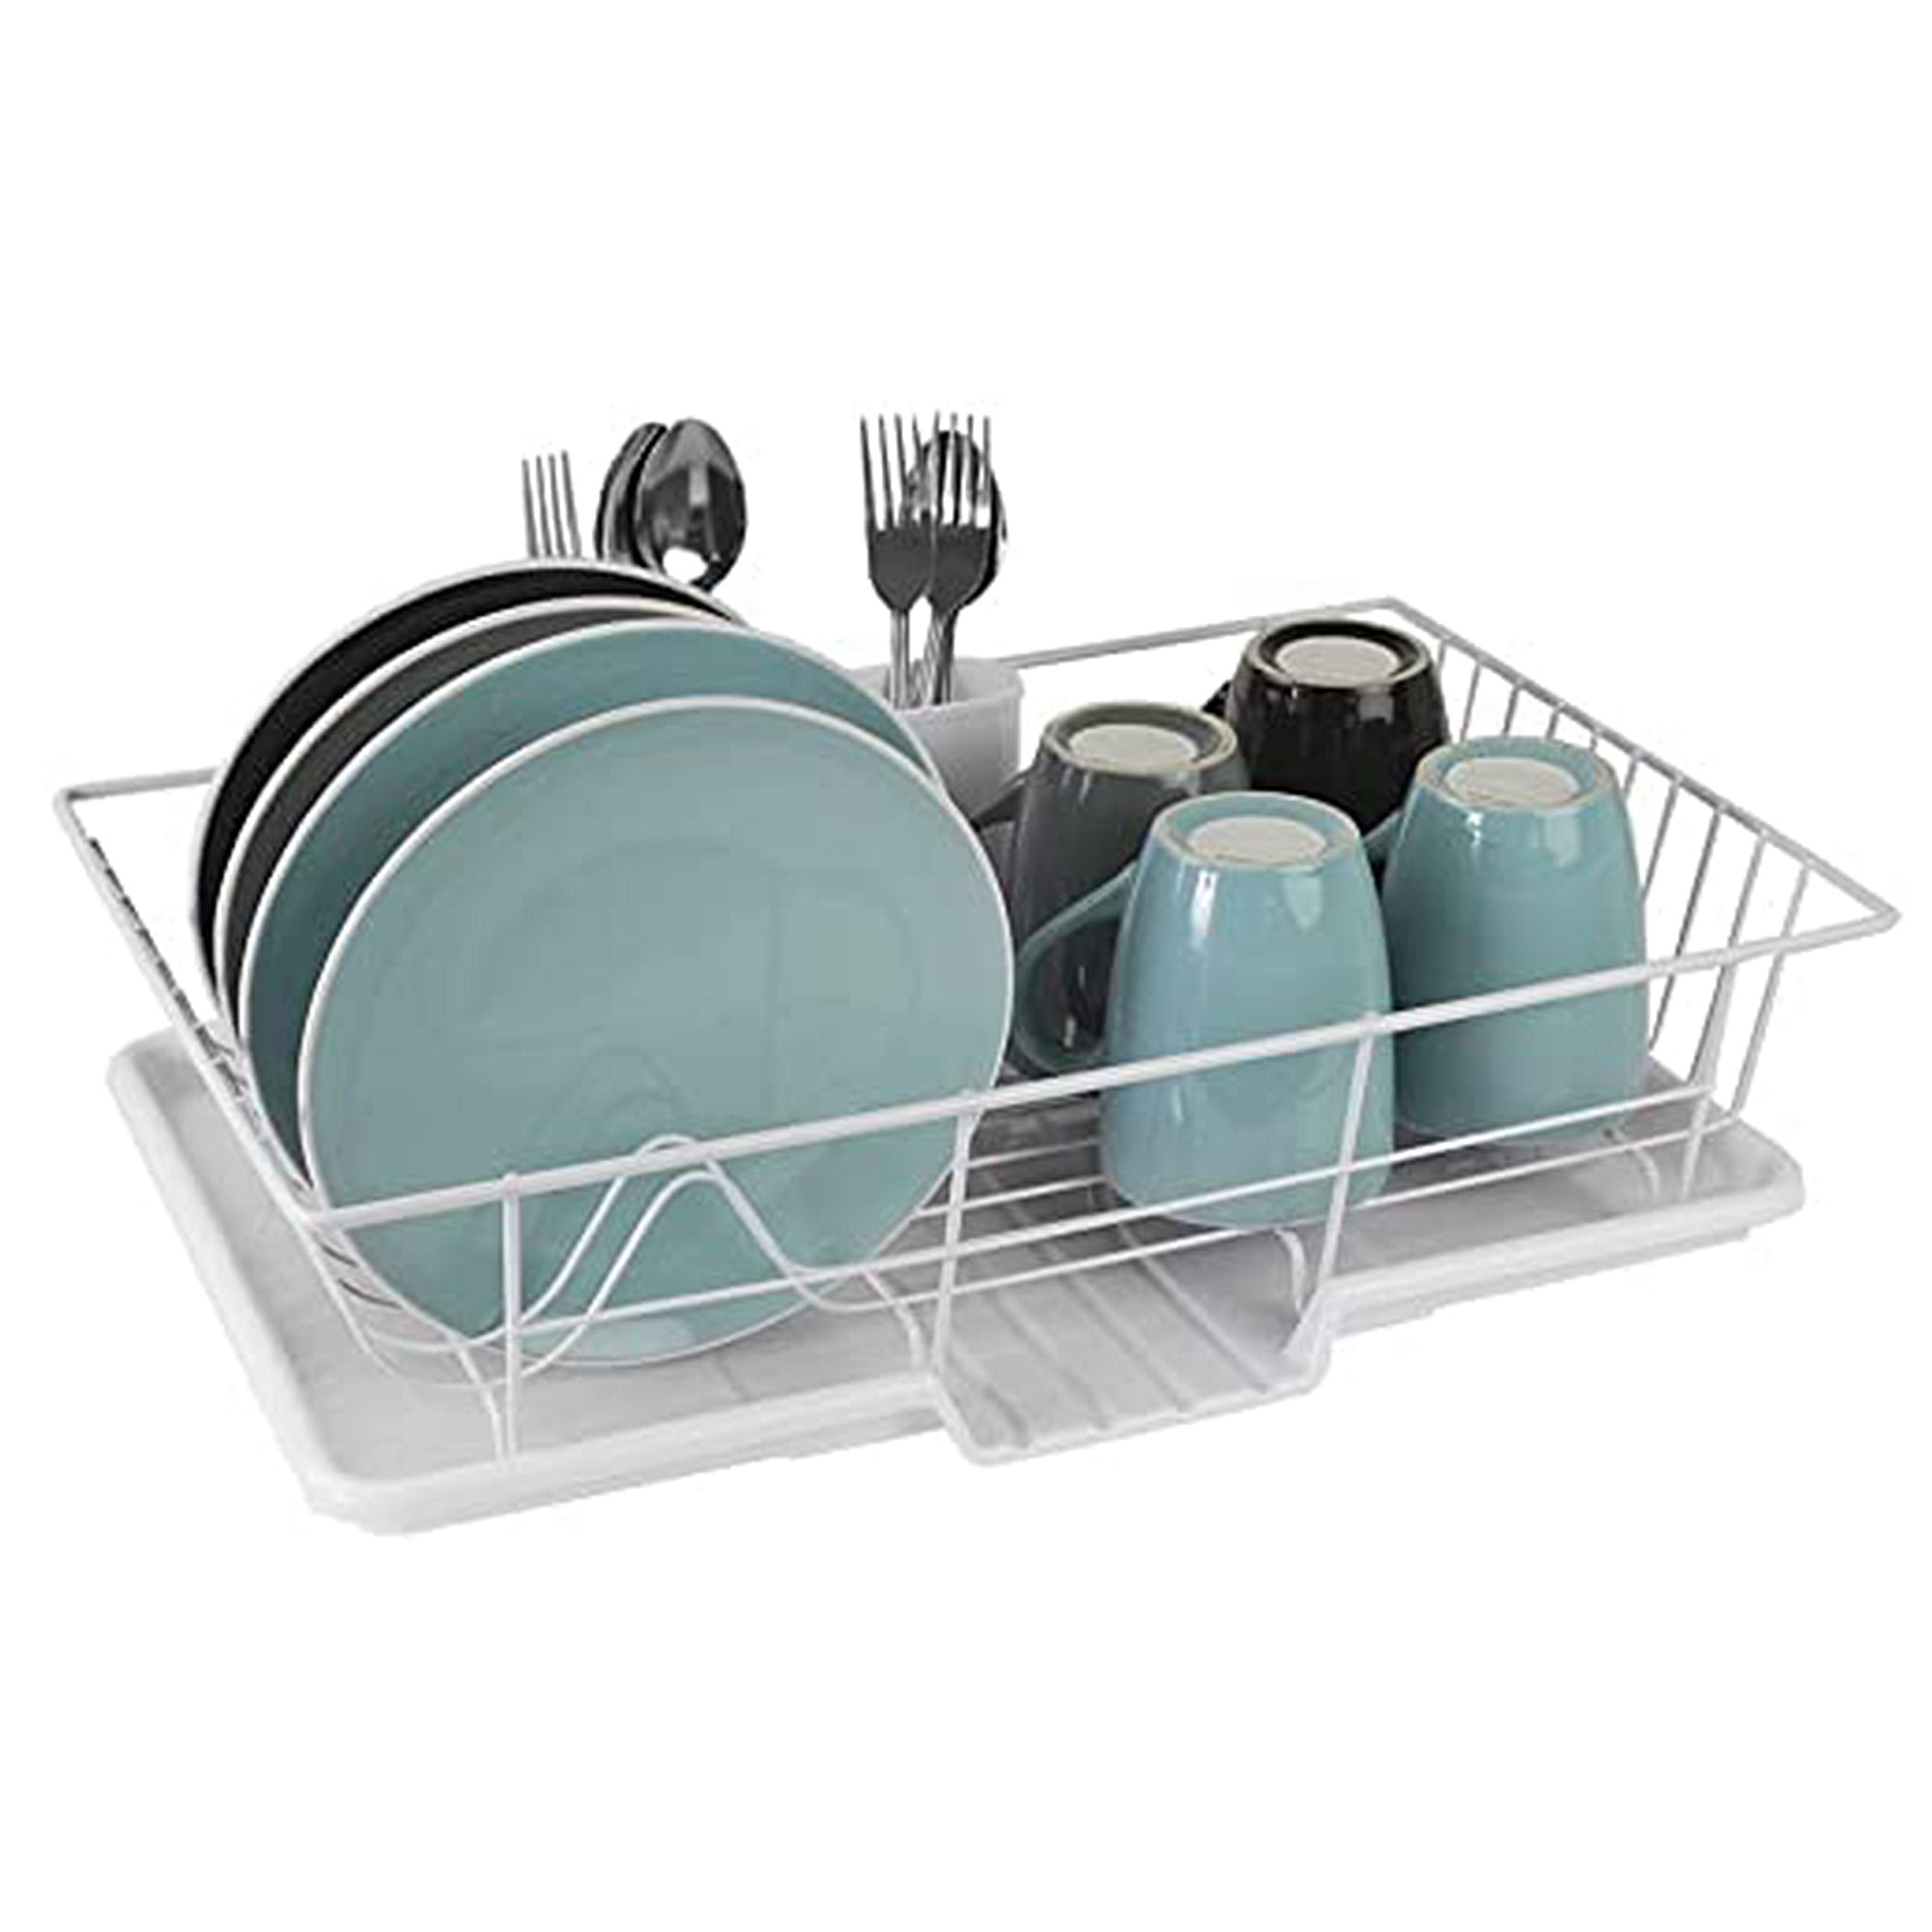 Warome Dish Drainer, Expandable Dish Rack and Drainboard Set